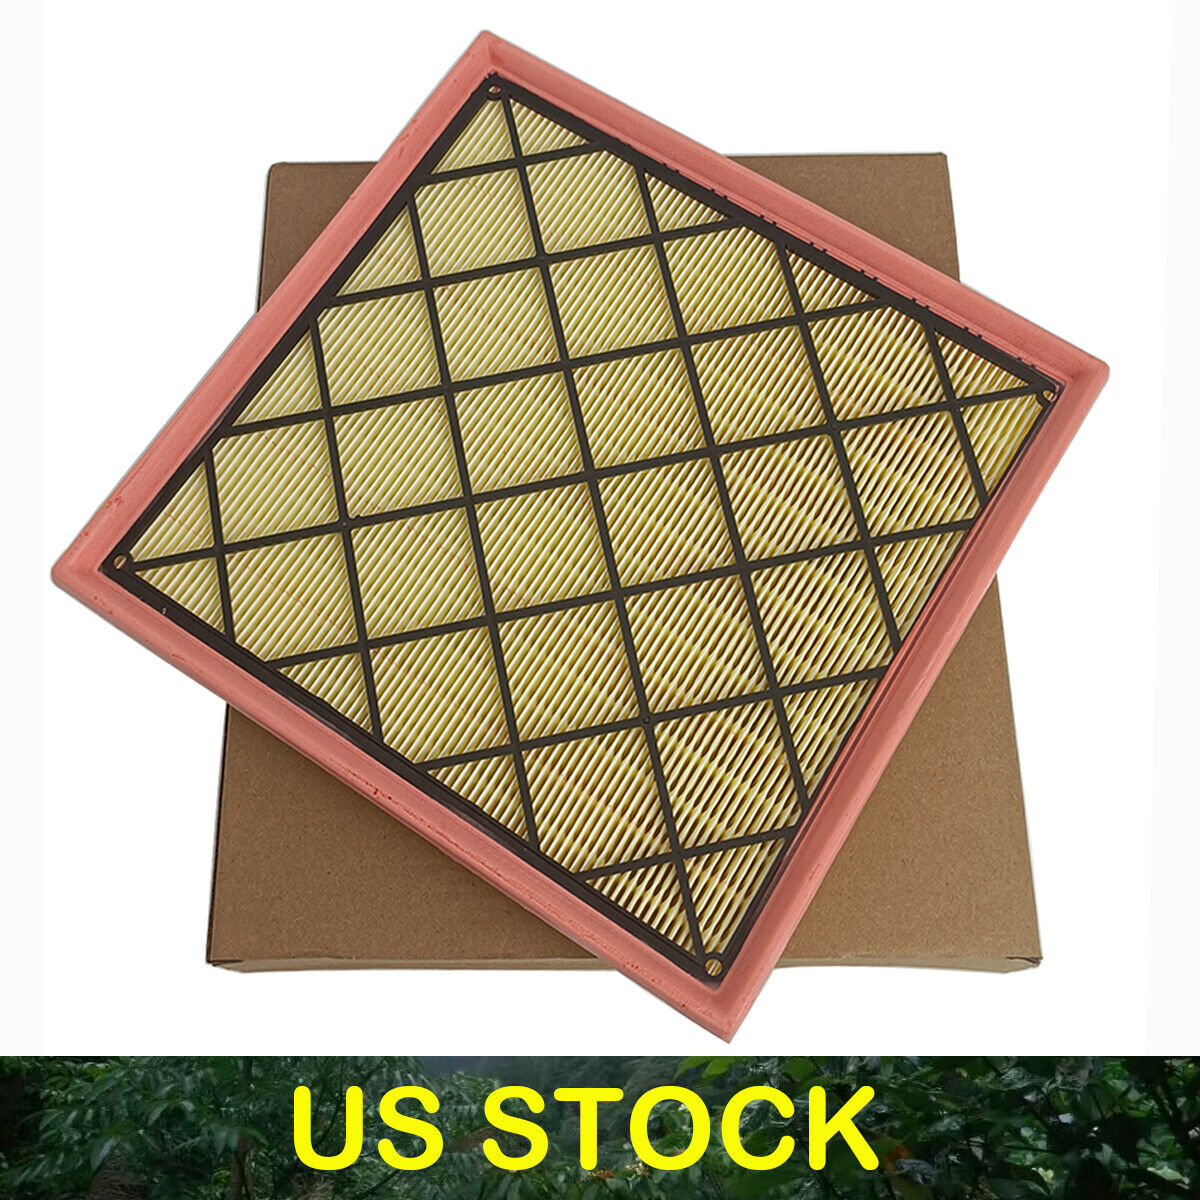 Air Filter For 2011-19 Buick Verano Cascada 1.6L For Chevy Cruze 1.4L 2011-2016